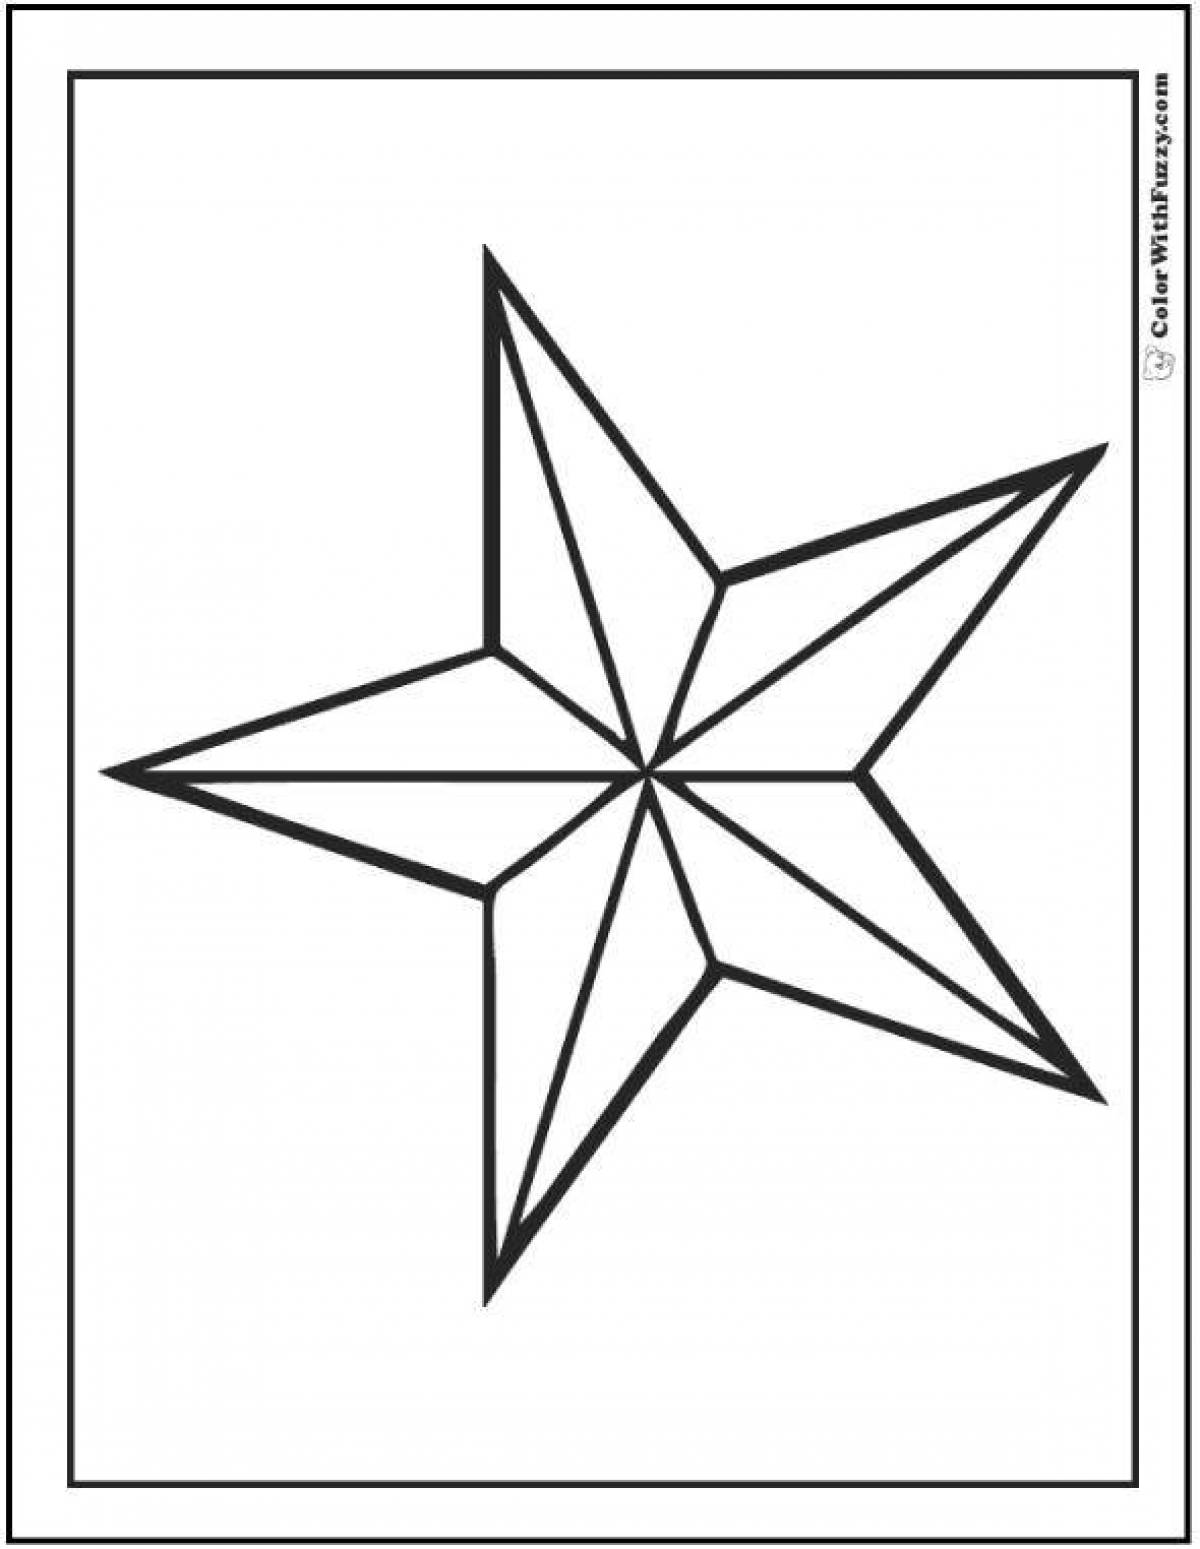 Refined War Star coloring page